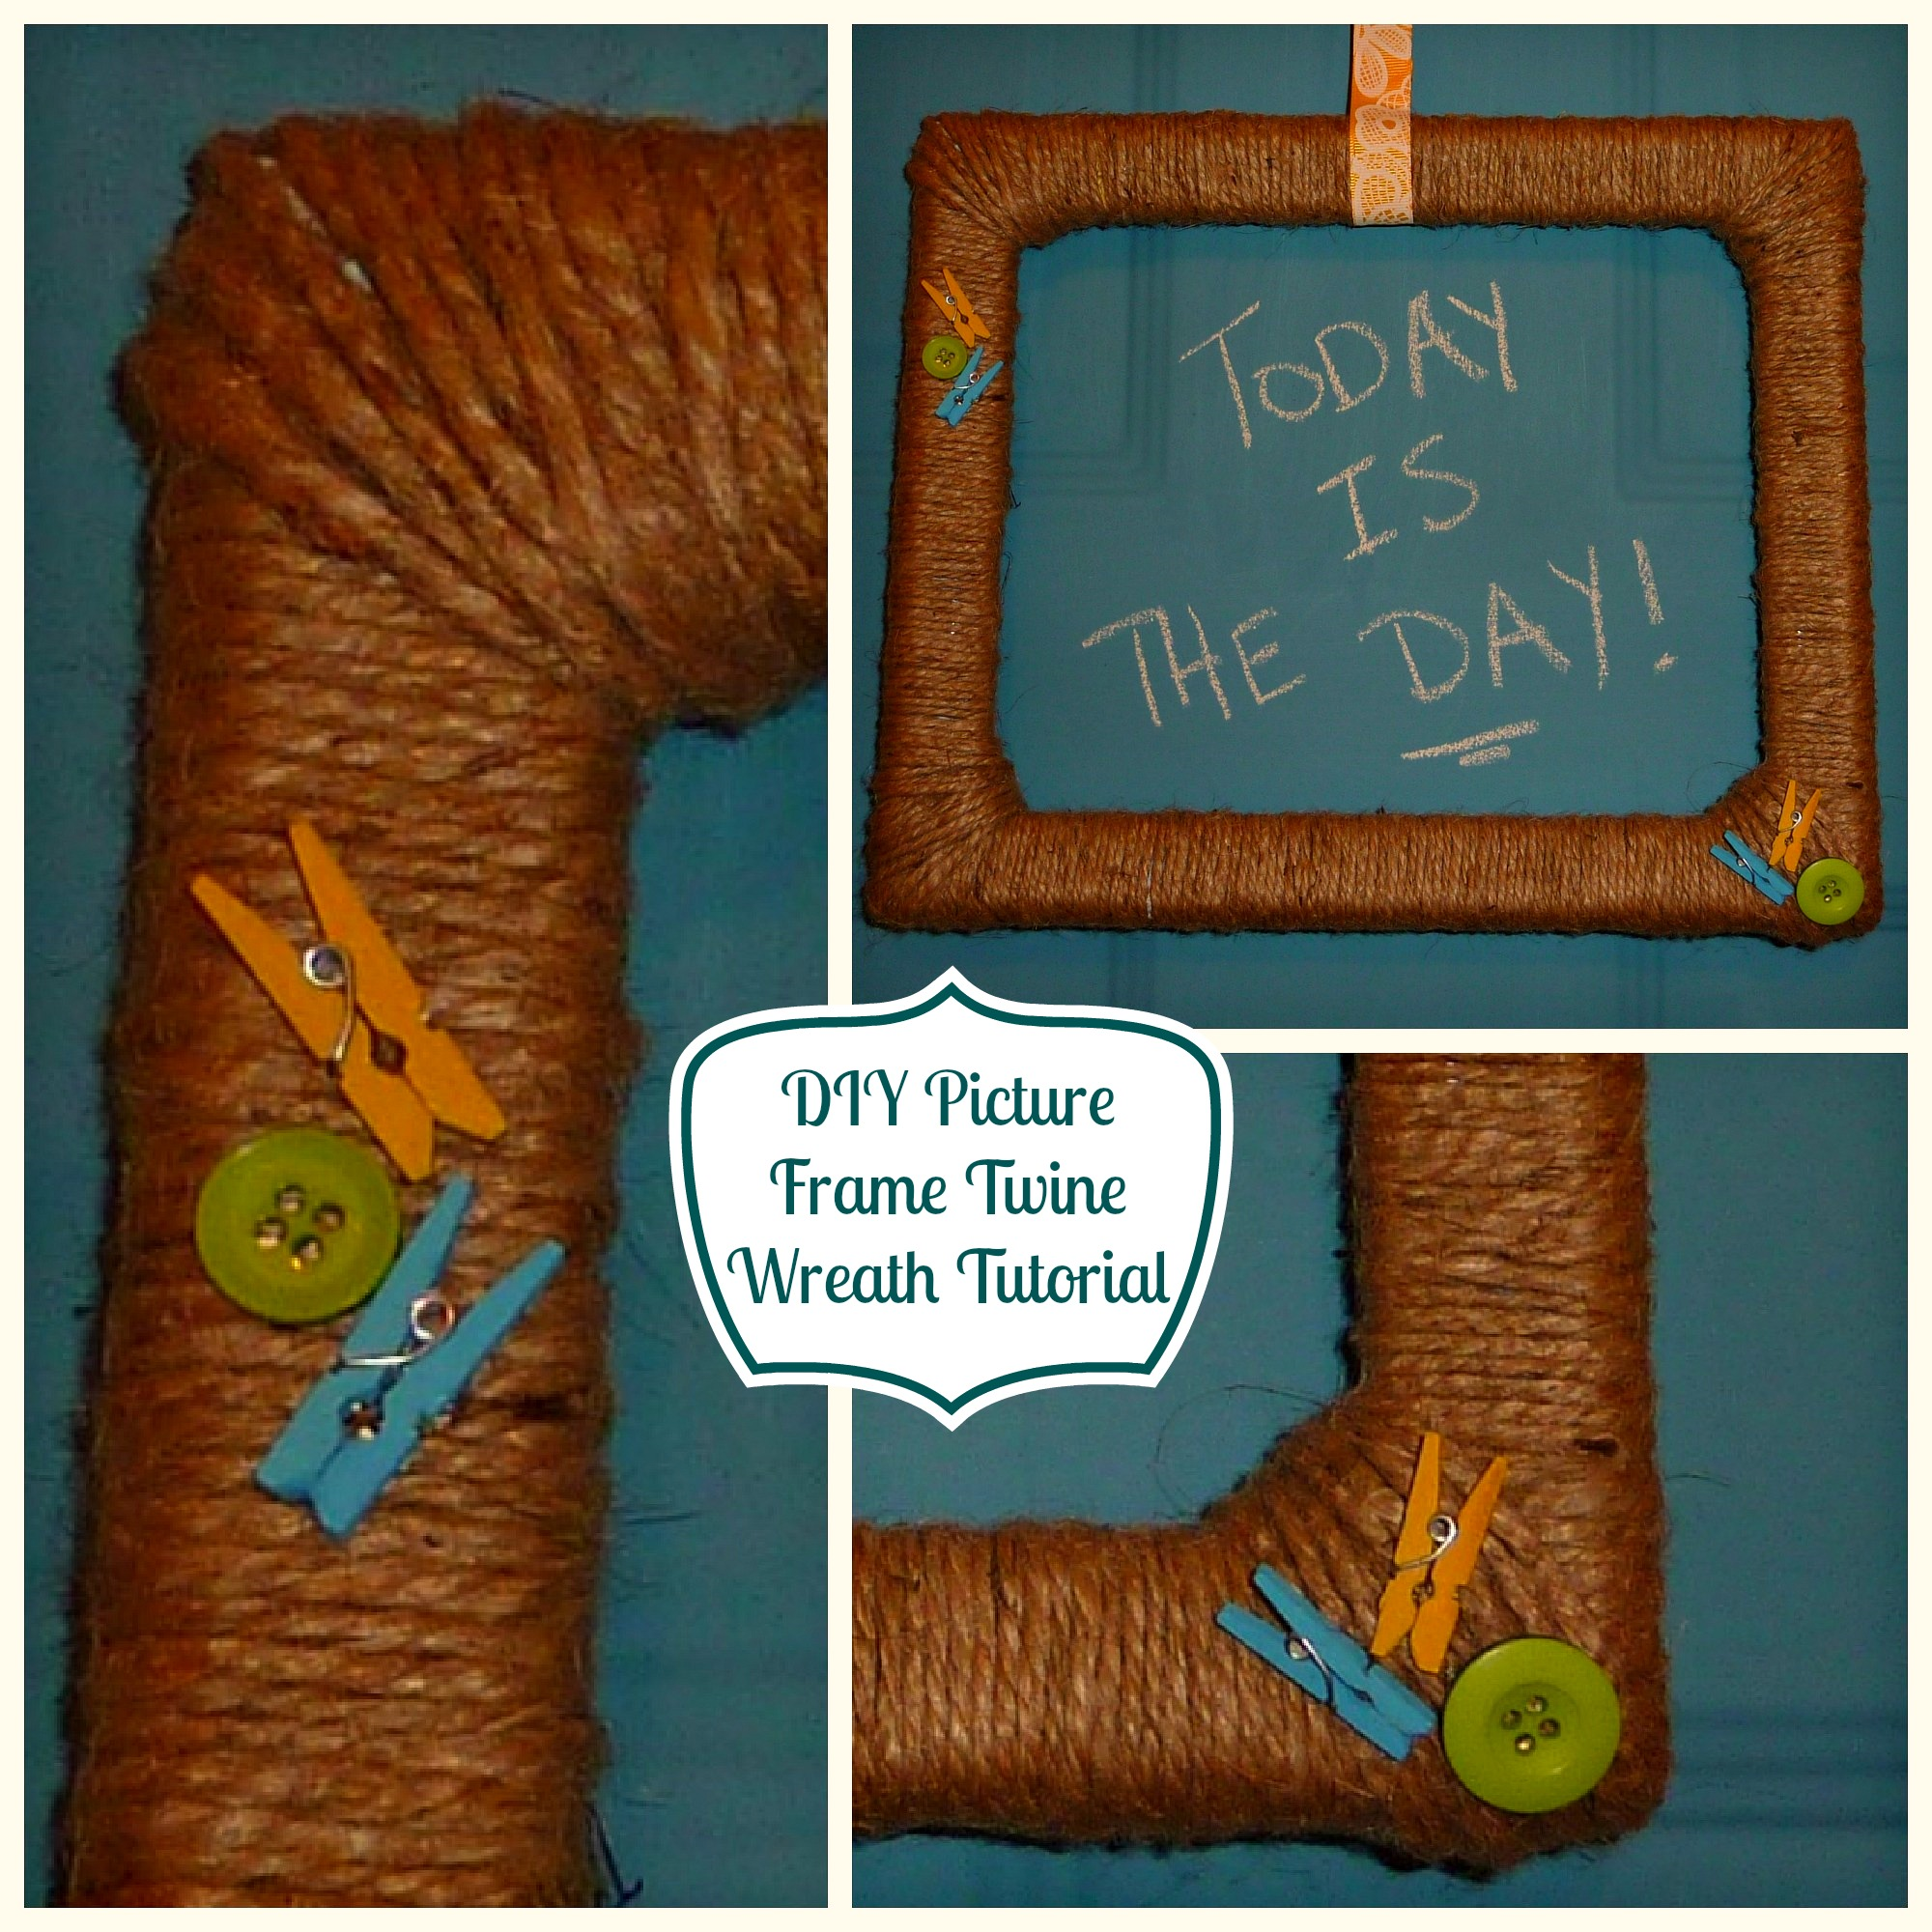 4F Craftin’: A Picture Frame Twine Wreath